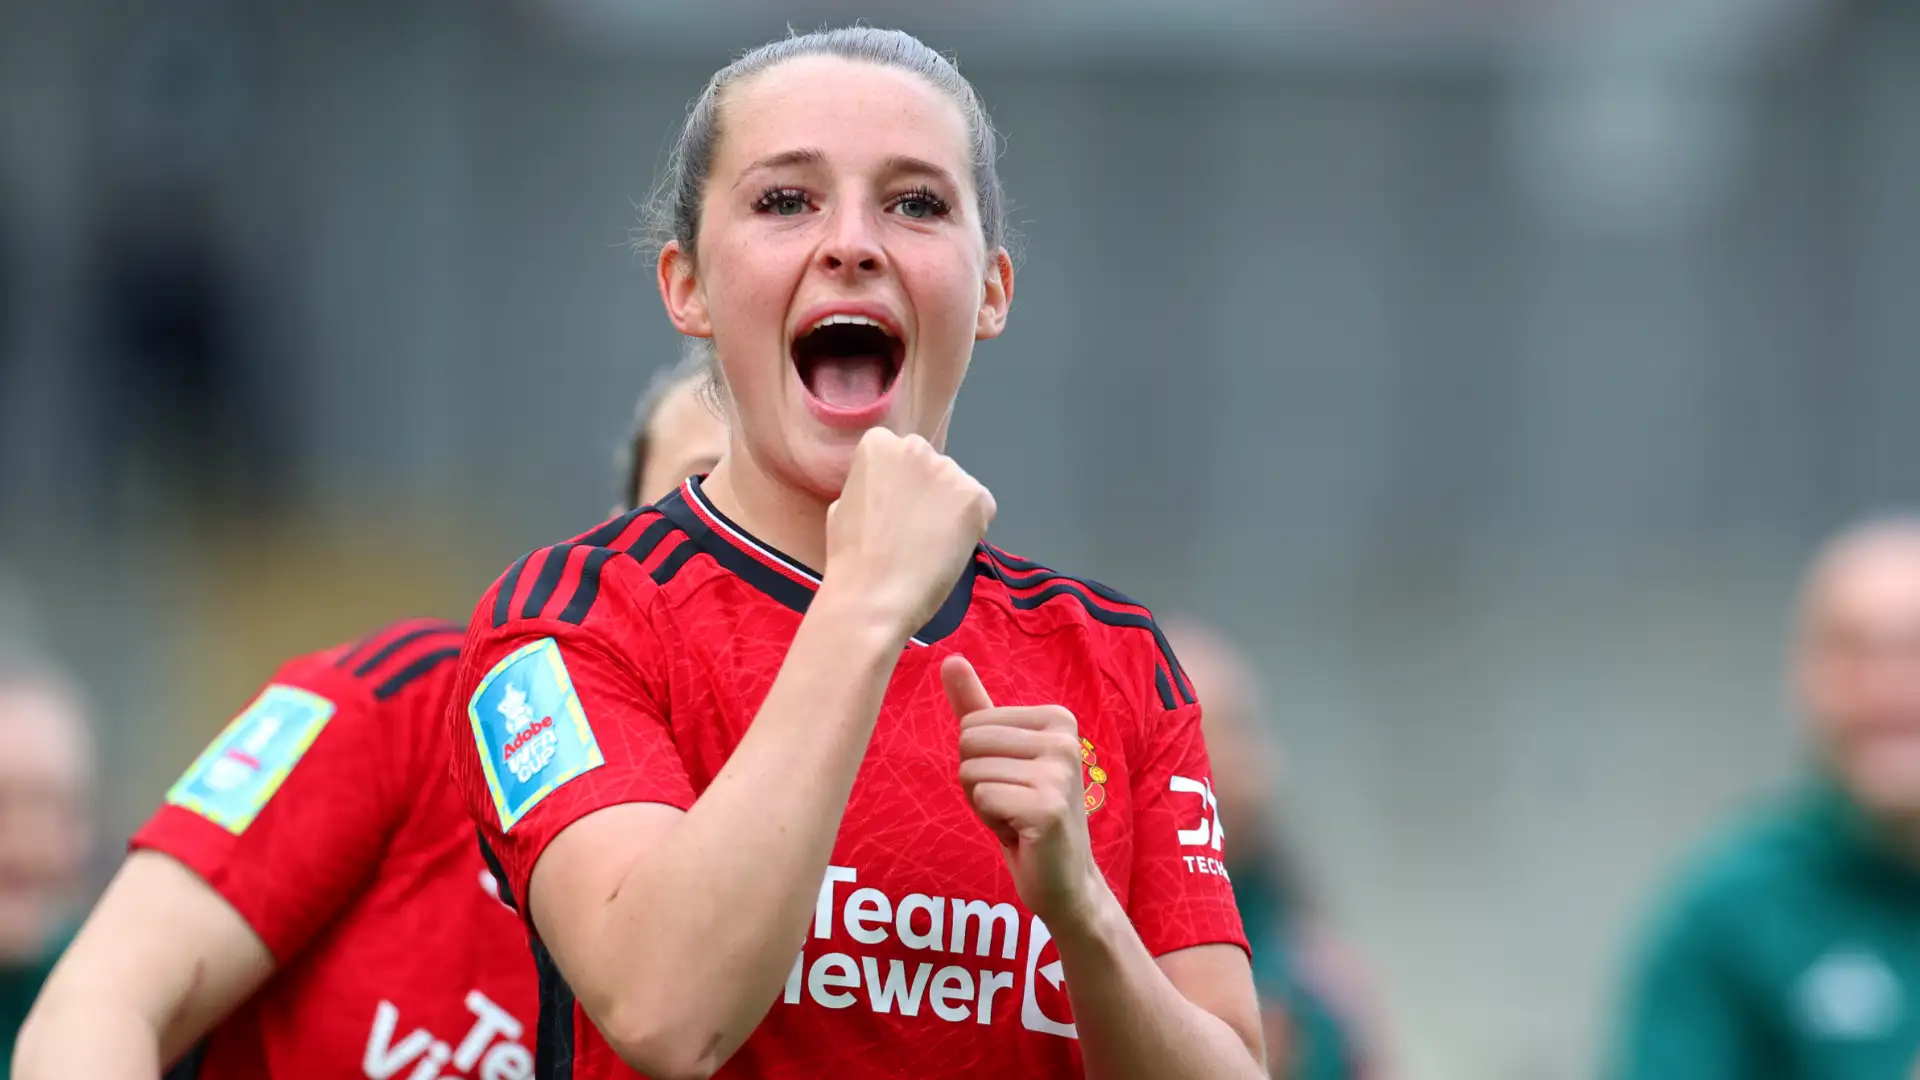 Lionesses star Ella Toone reveals how chat with Man Utd goalkeeper helped her score world-class FA Cup final goal against Tottenham at Wembley